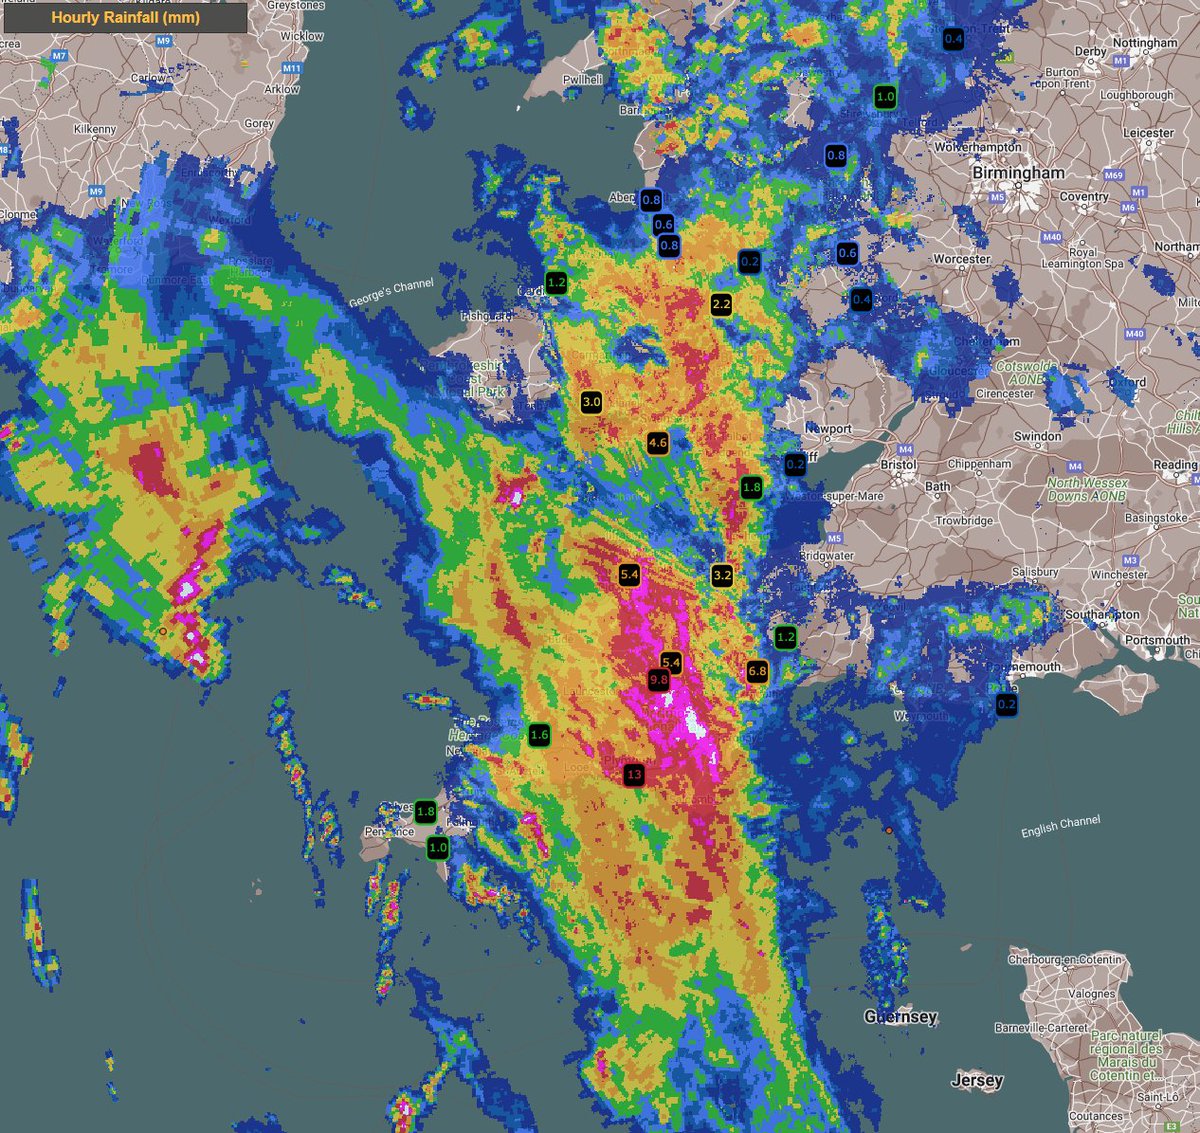 Further heavy rain continues across parts of SW England, a further 13mm 8-9pm now making a total of over 34mm in the last few hours, expect some reports of local flooding to come in soon. Further hourly reports of 5-10mm across many parts of Devon atm. #DEVON #cornwall #somerset